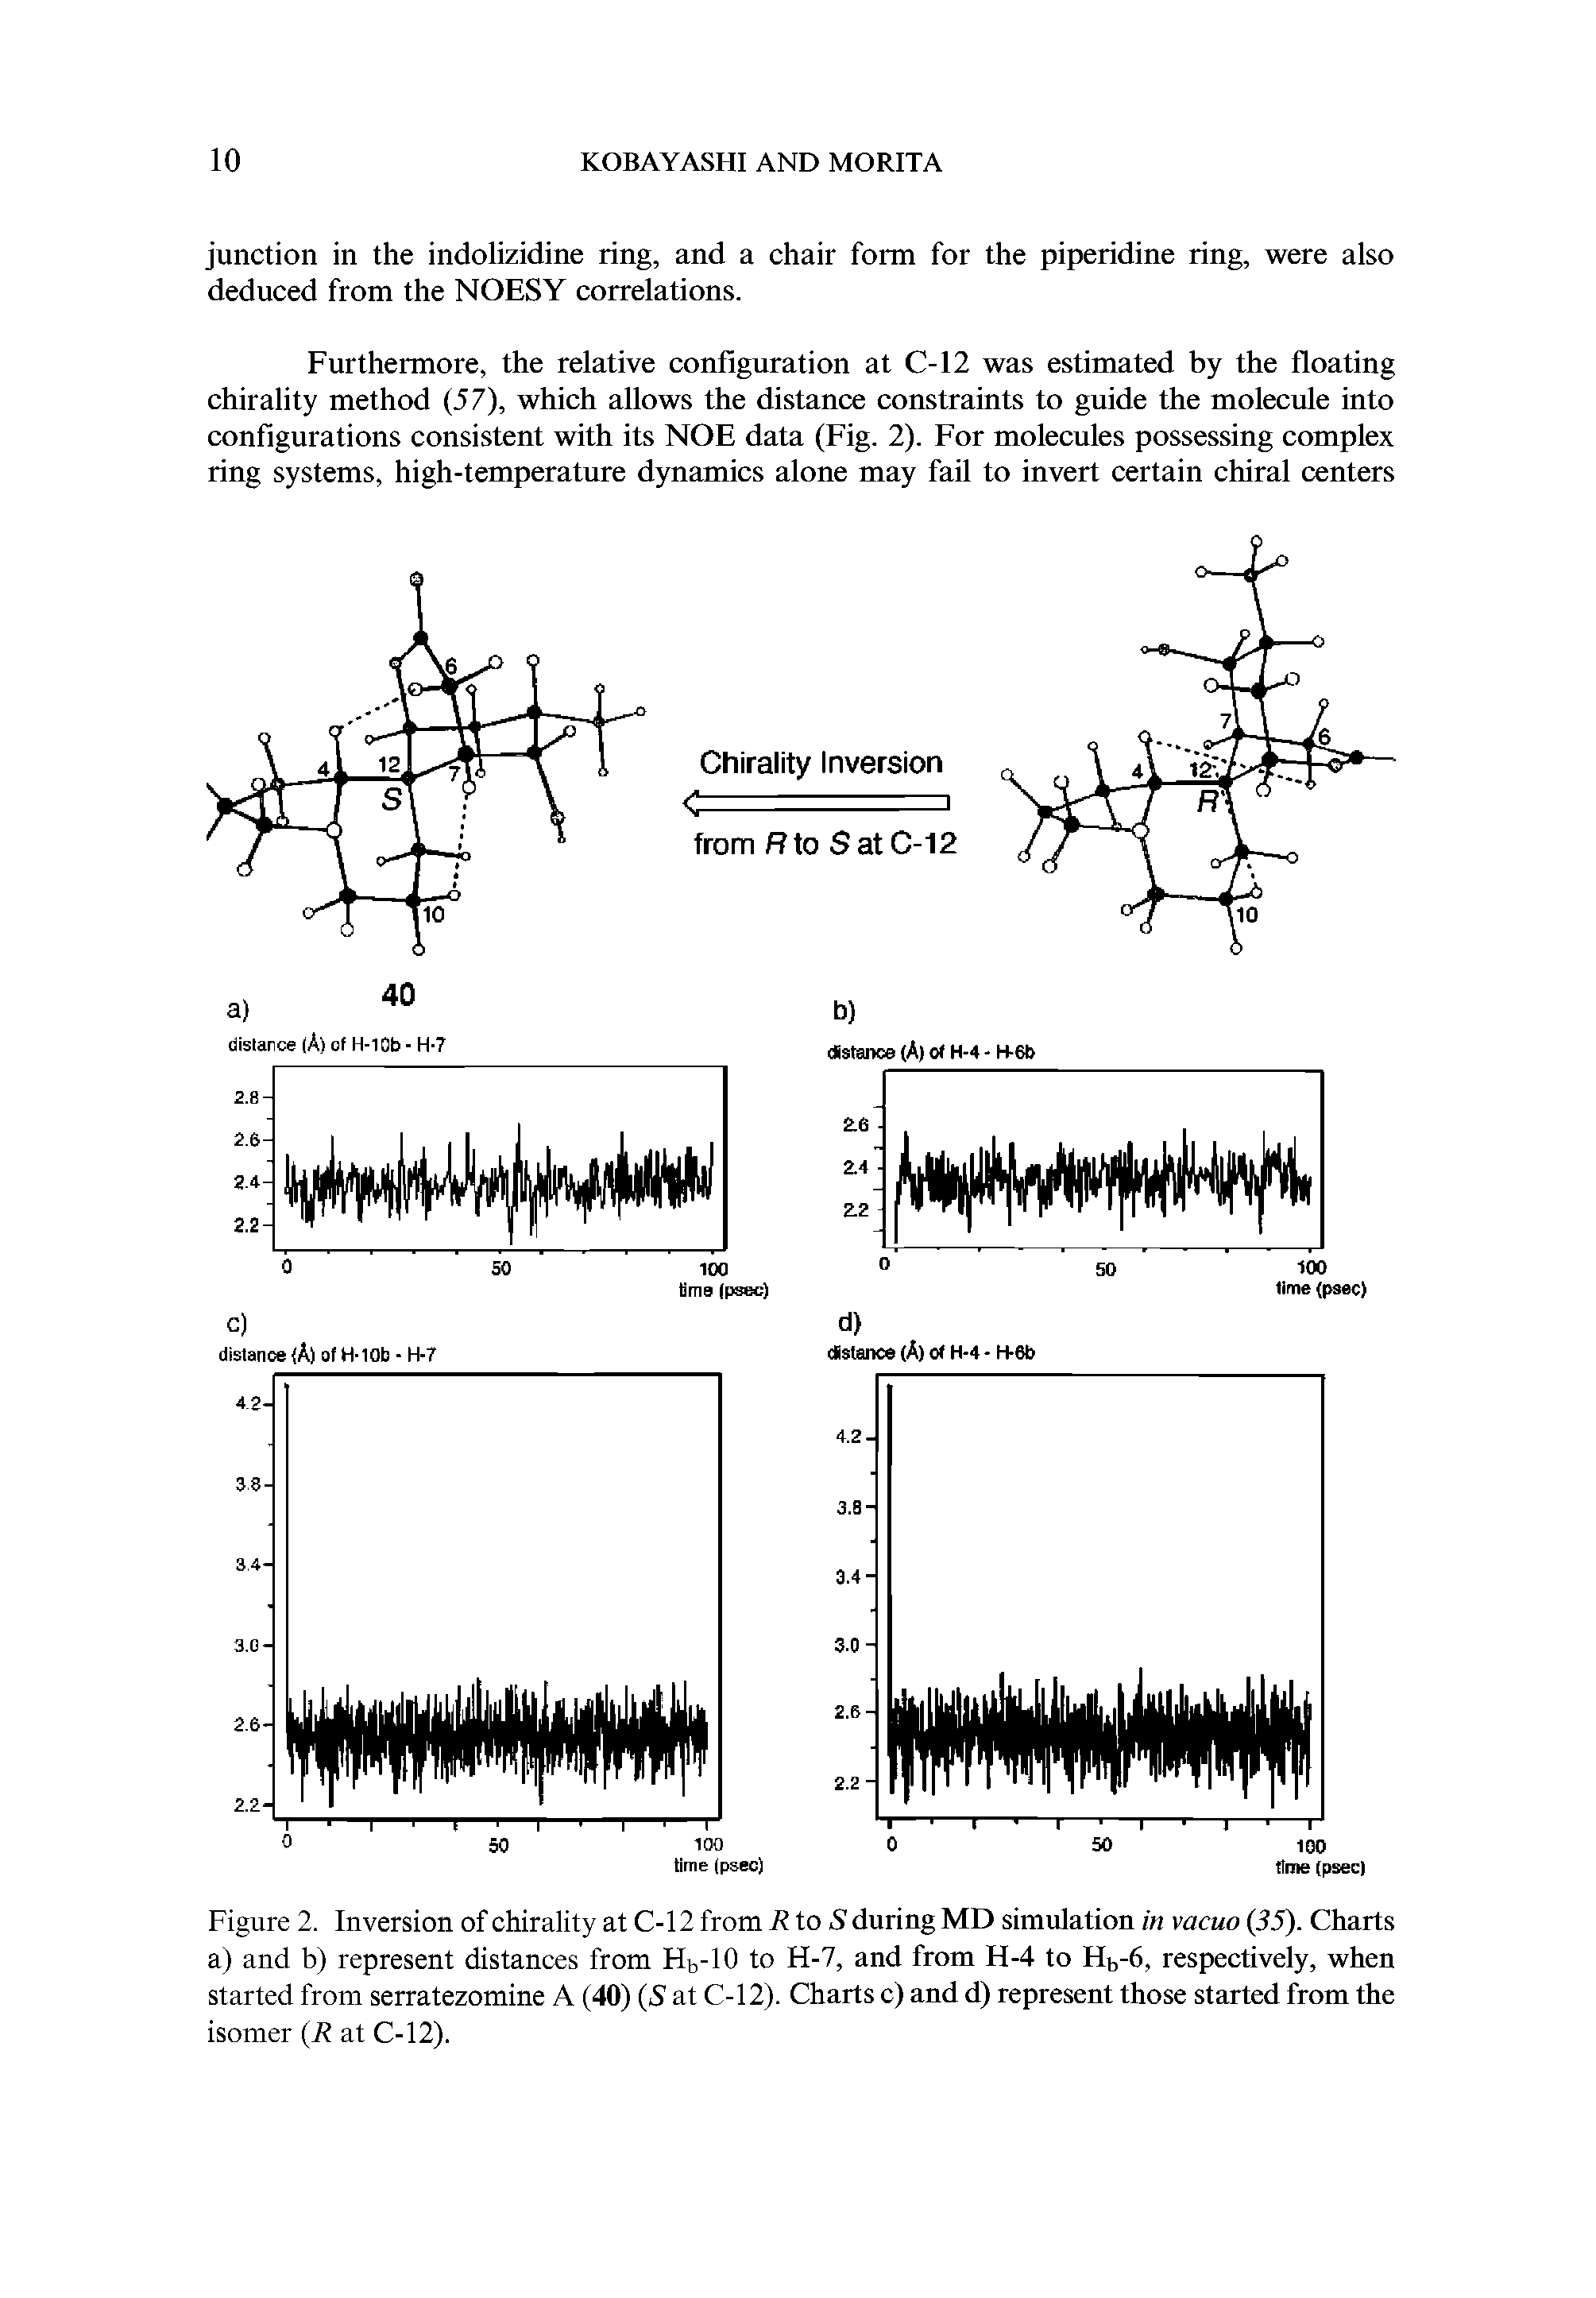 Figure 2. Inversion of chirality at C-12 from if to S during MD simulation in vacuo (55). Charts a) and b) represent distances from Hb-10 to H-7, and from H-4 to Hb-6, respectively, when started from serratezomine A (40) (S at C-12). Charts c) and d) represent those started from the isomer (if at C-12).